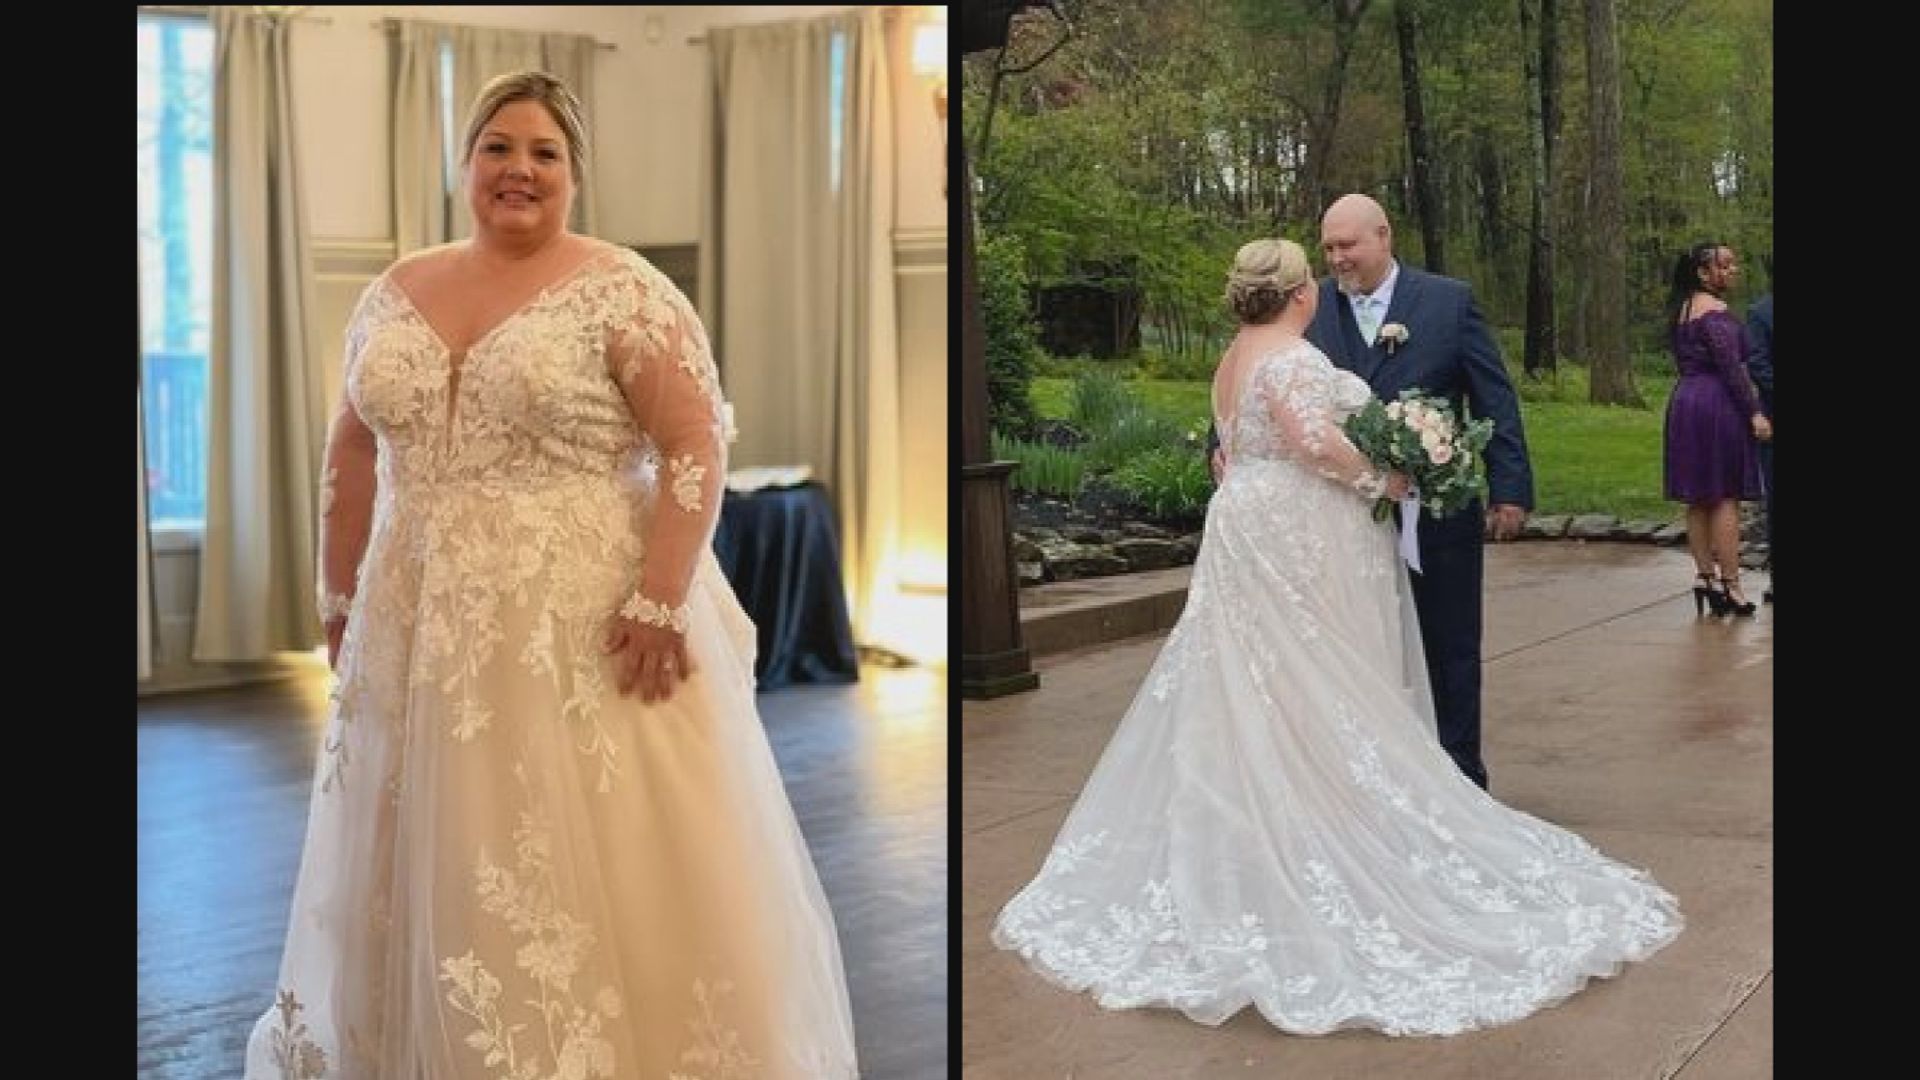 Trumbull County woman giving away wedding dress to a bride-to-be - WFMJ.com